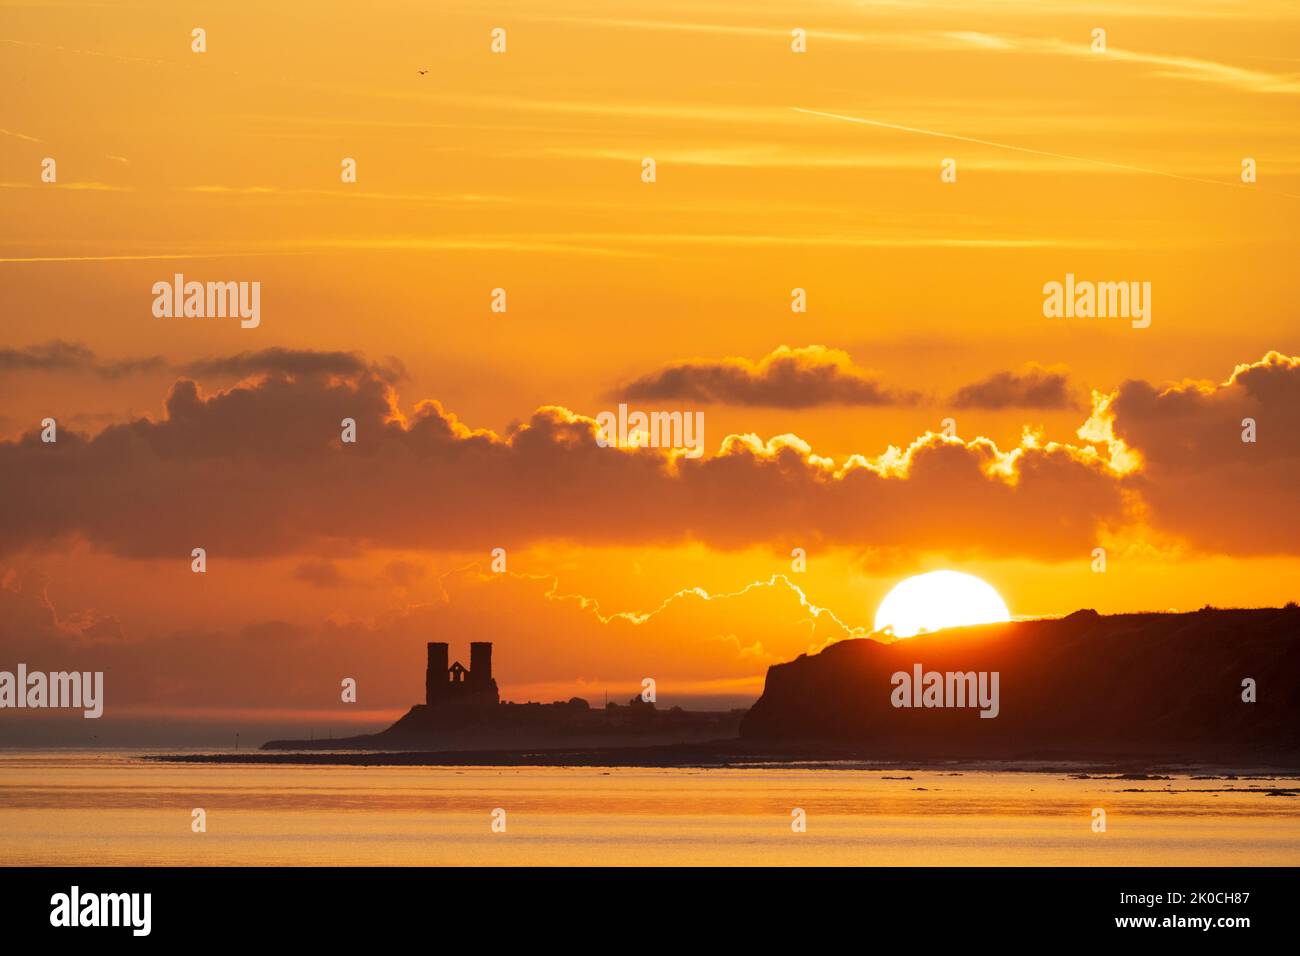 Herne Bay, Kent. 11/09/22. The sunrise over the sea and the landmark Reculver twin towers of the ruined 12th century church, long used as a navigation aid by seafarers. Some ground drifting in over the headland which was quickly dispersed when the sun rose. Credit-Malcolm Fairman, Alamy Live News. Stock Photo